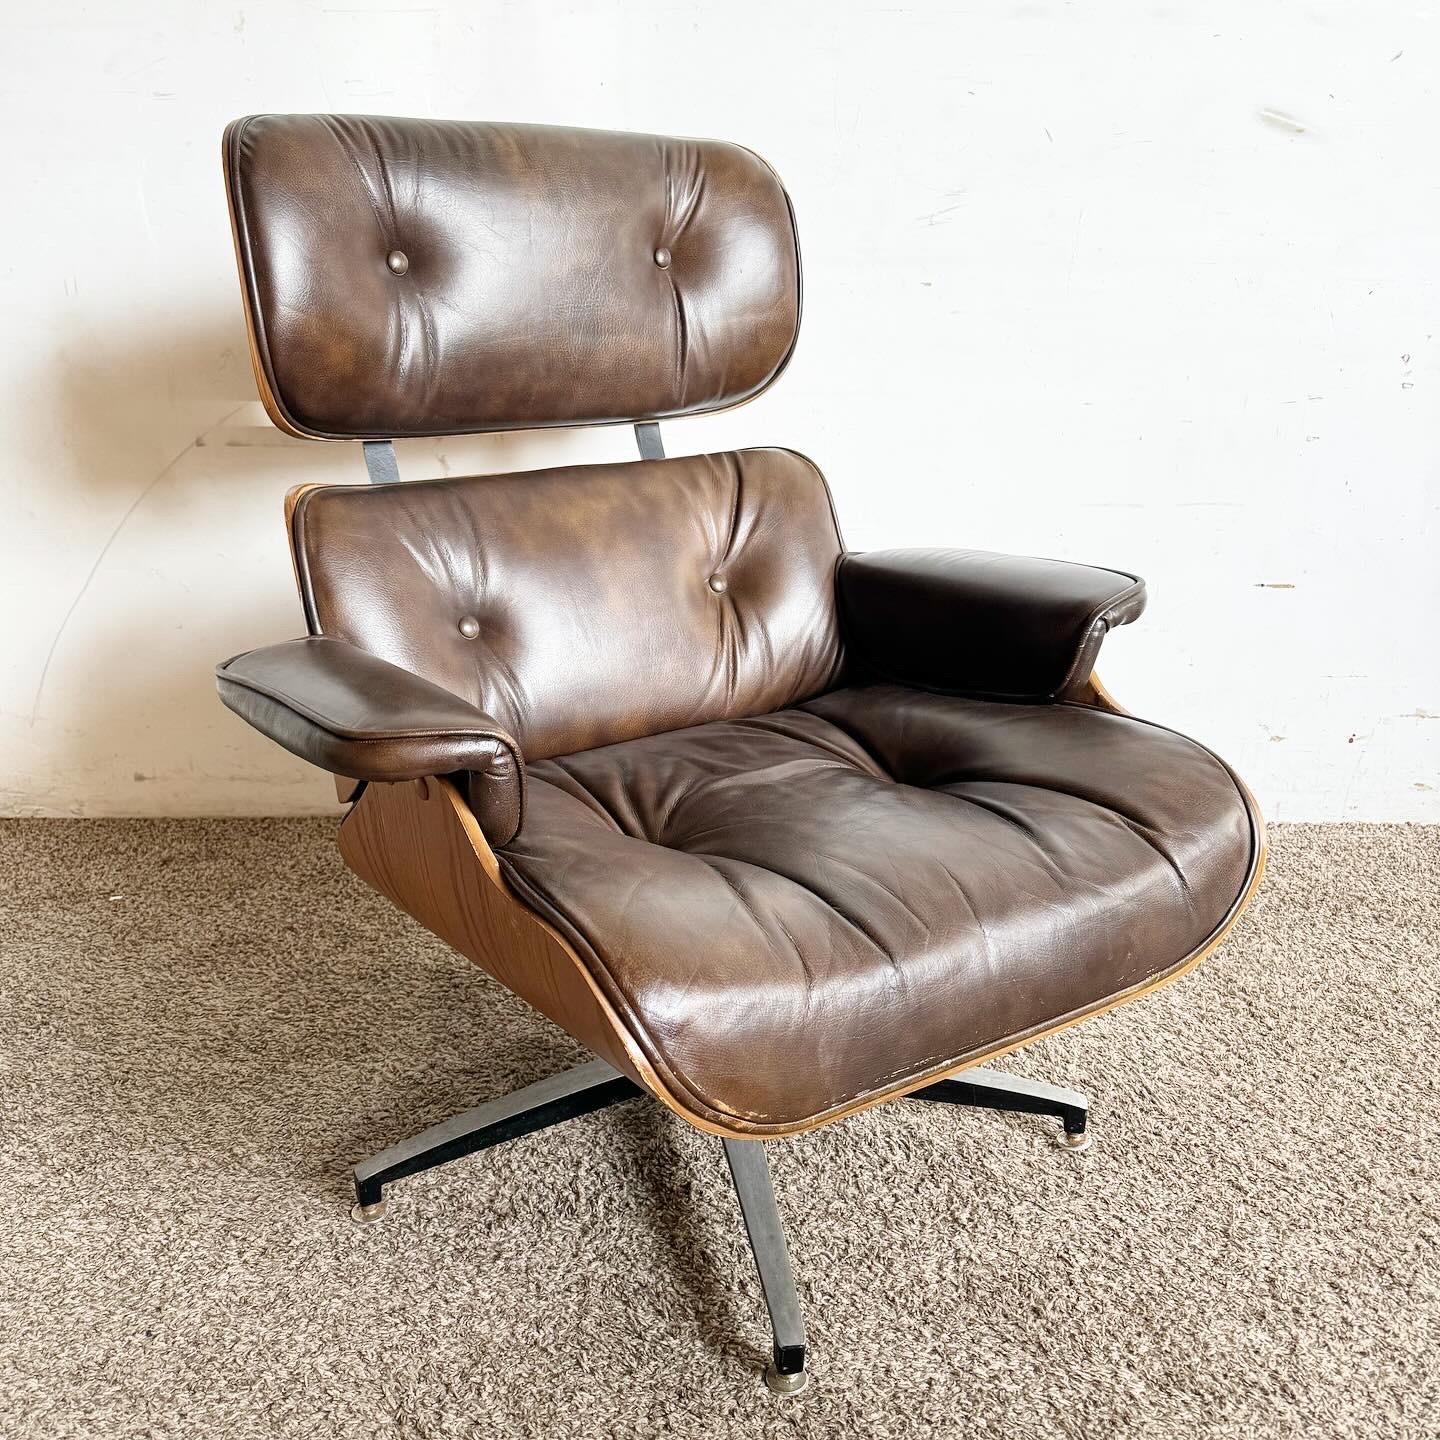 Embrace the iconic Mid Century Modern Eames Style Lounge Chair by Frank Doerner for Plycraft. This piece combines ergonomic comfort with timeless design, featuring high-quality leather and a curved wood frame, perfect for any stylish interior.